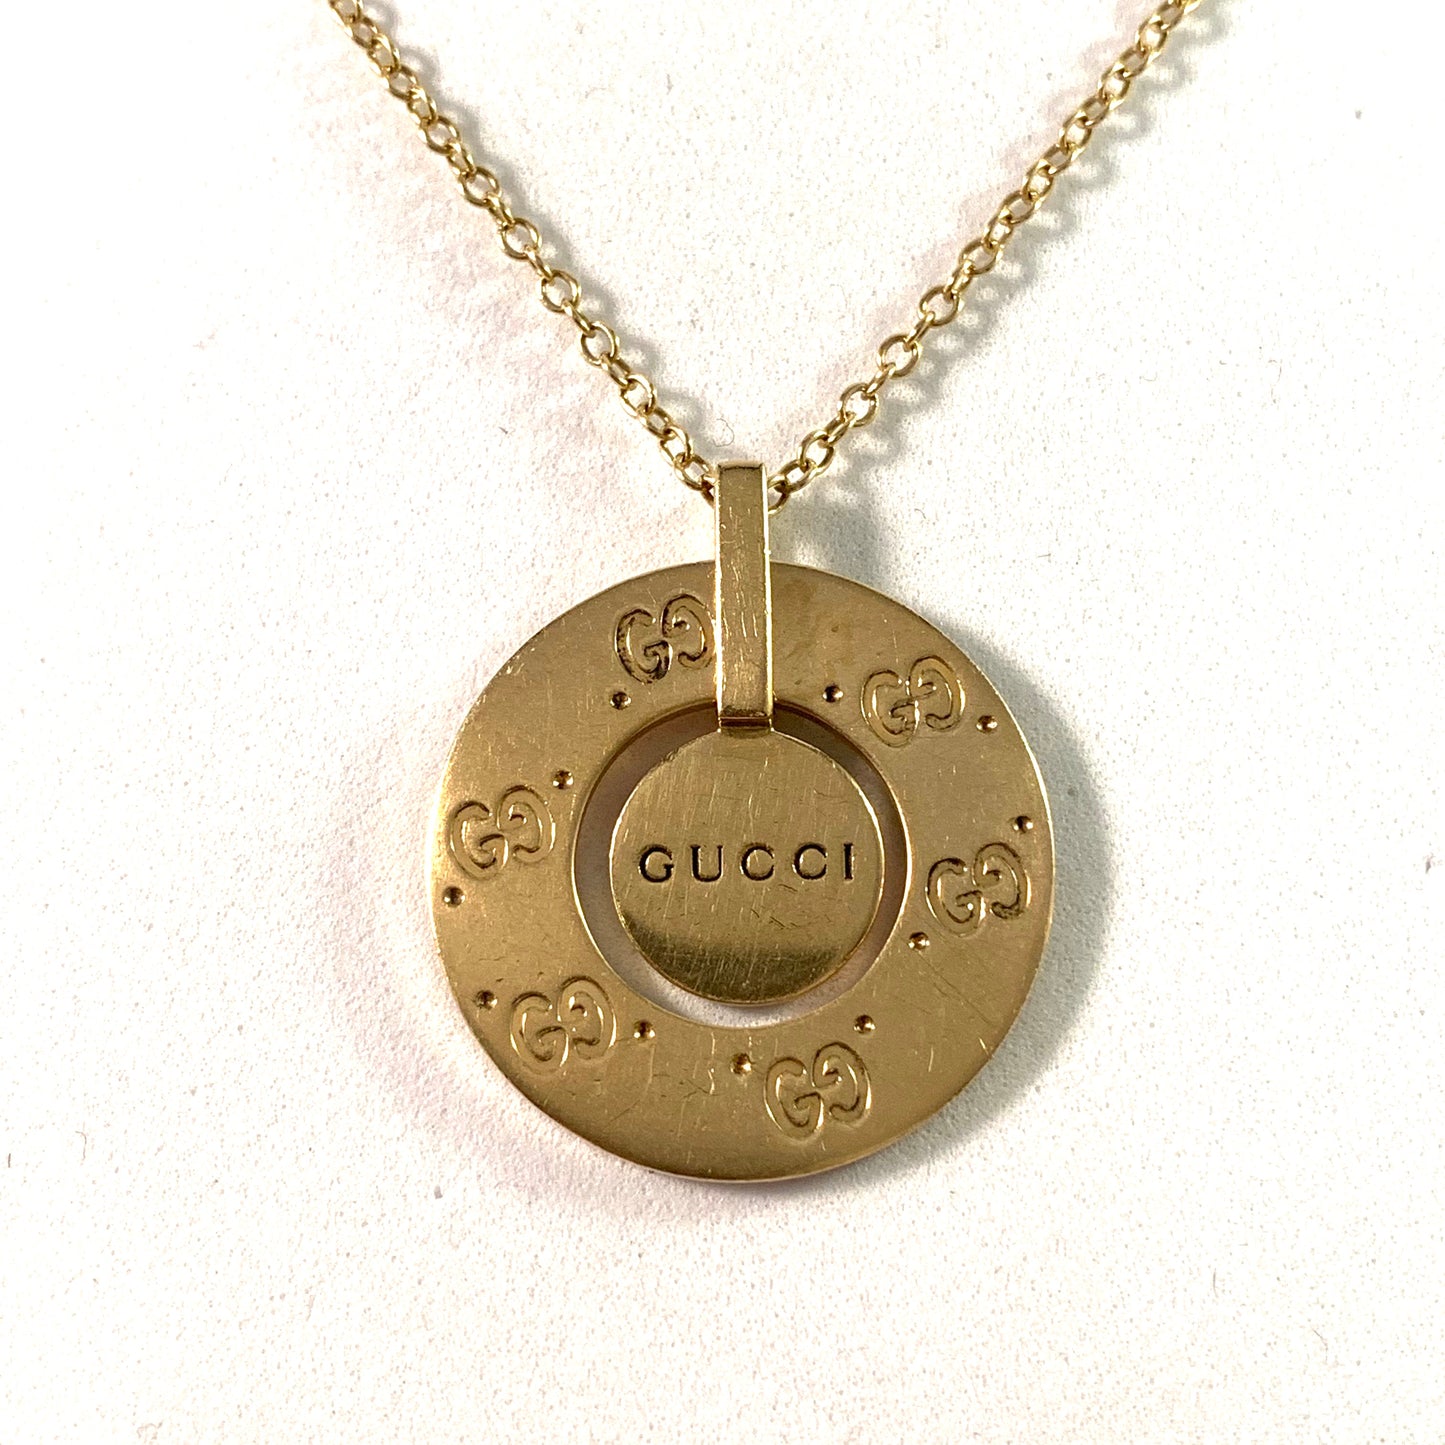 Gucci, Italy 18k Gold Pendant Necklace. Boxed.